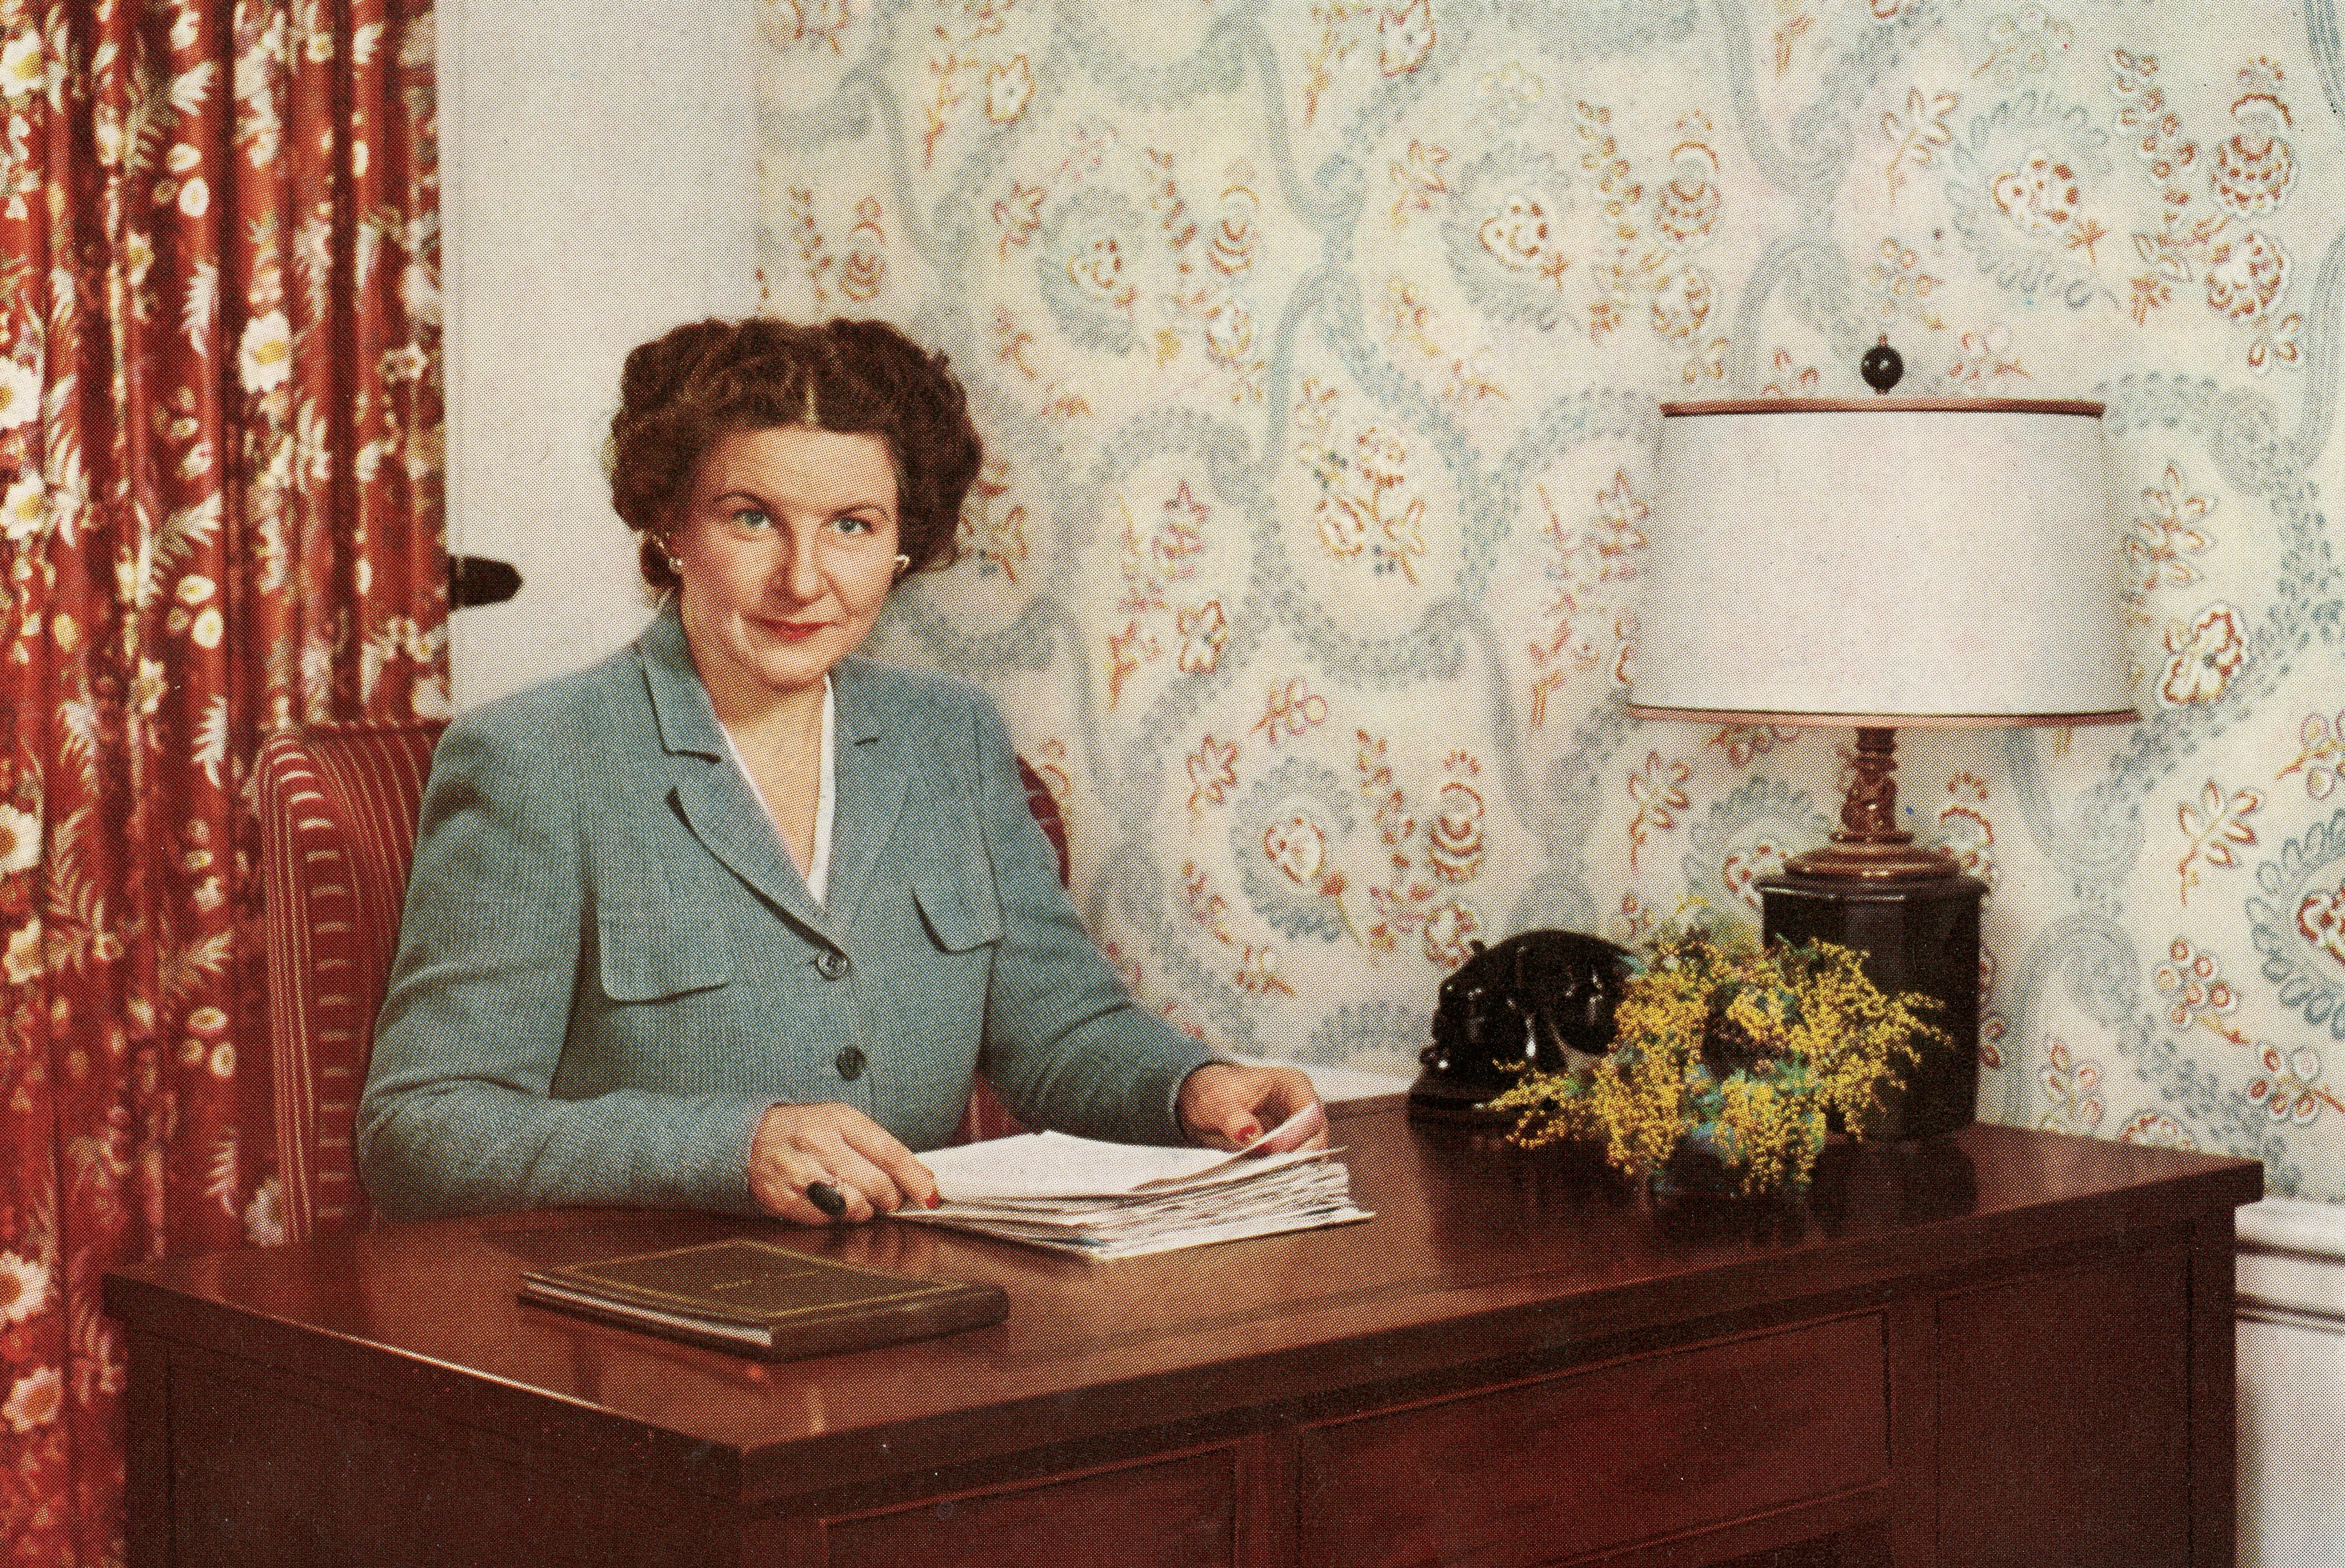 Marjorie Child Husted sitting at a desk in the 1940s